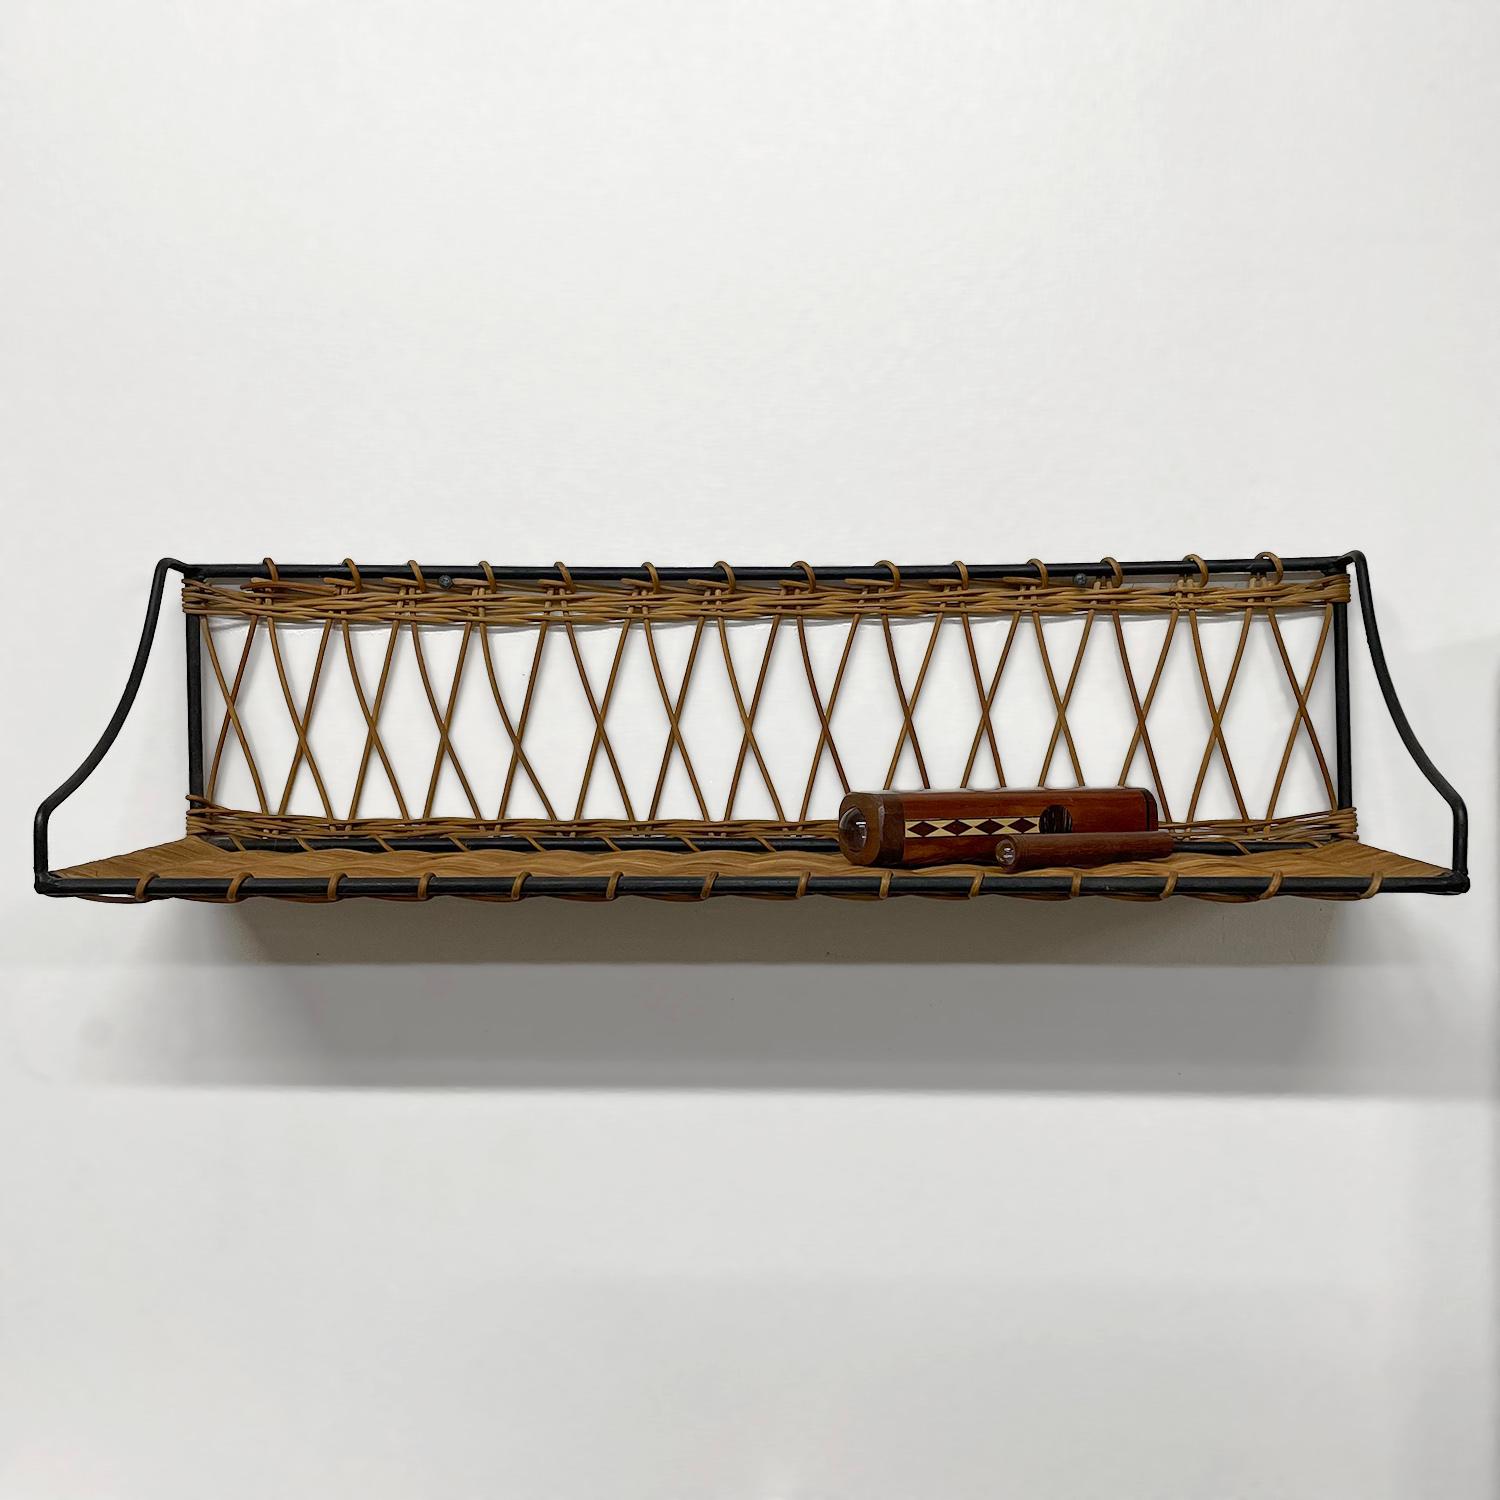 French wicker & iron shelf
France, circa 1950’s
Clean lines, beautiful and functional
Can be mounted two ways
Intricately woven wicker delicately wraps sturdy iron frame
Natural color variations
Patina from age and use